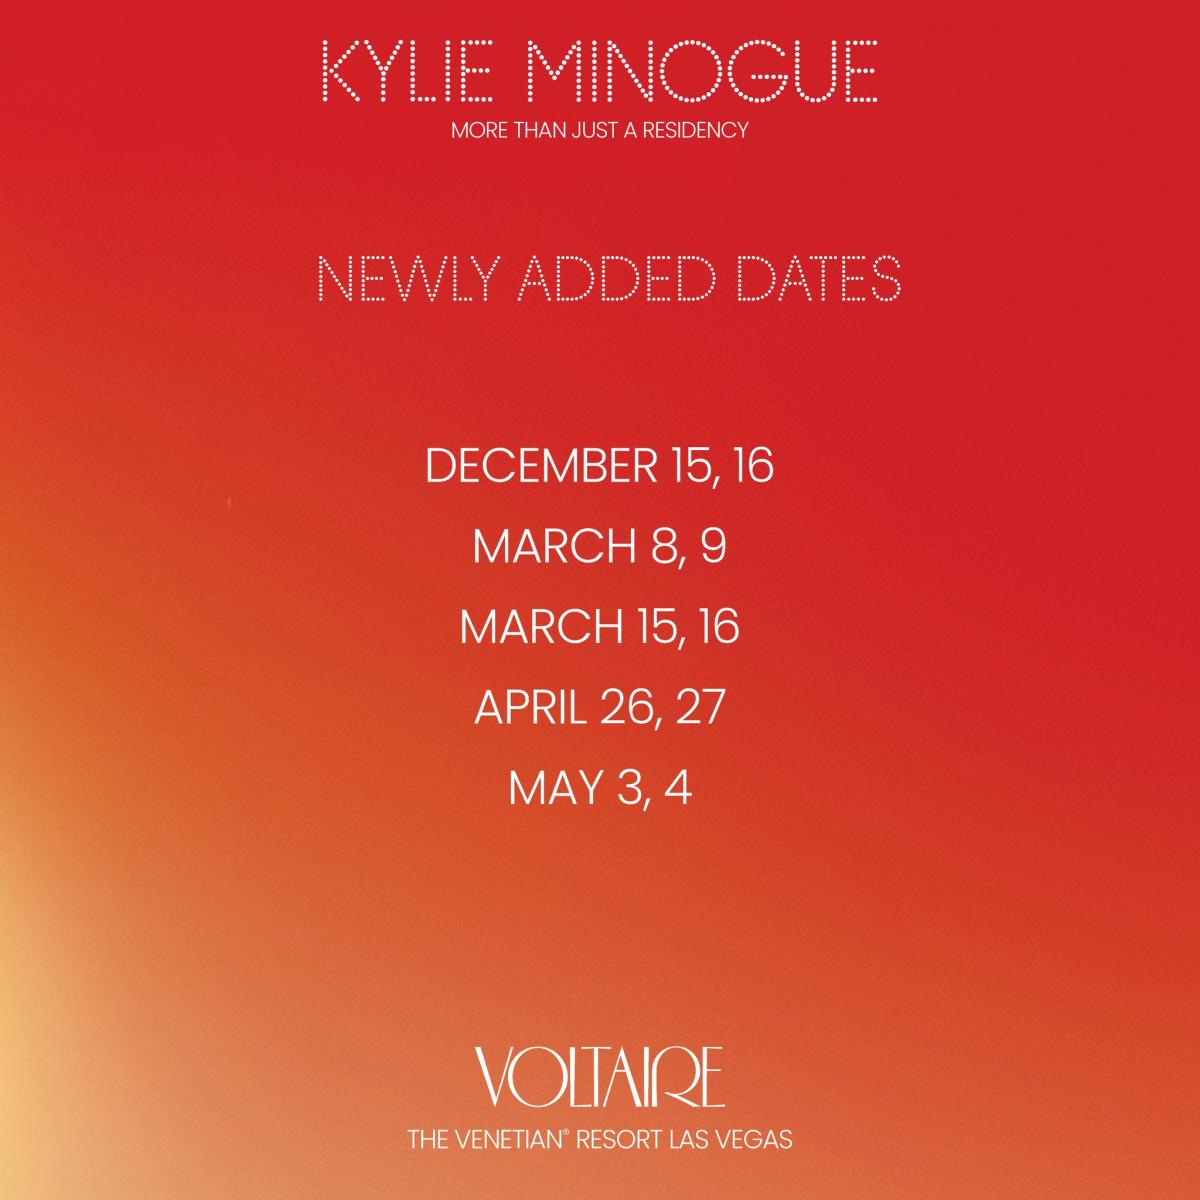 Kylie Minogue announces extra Las Vegas residency dates and ticket info